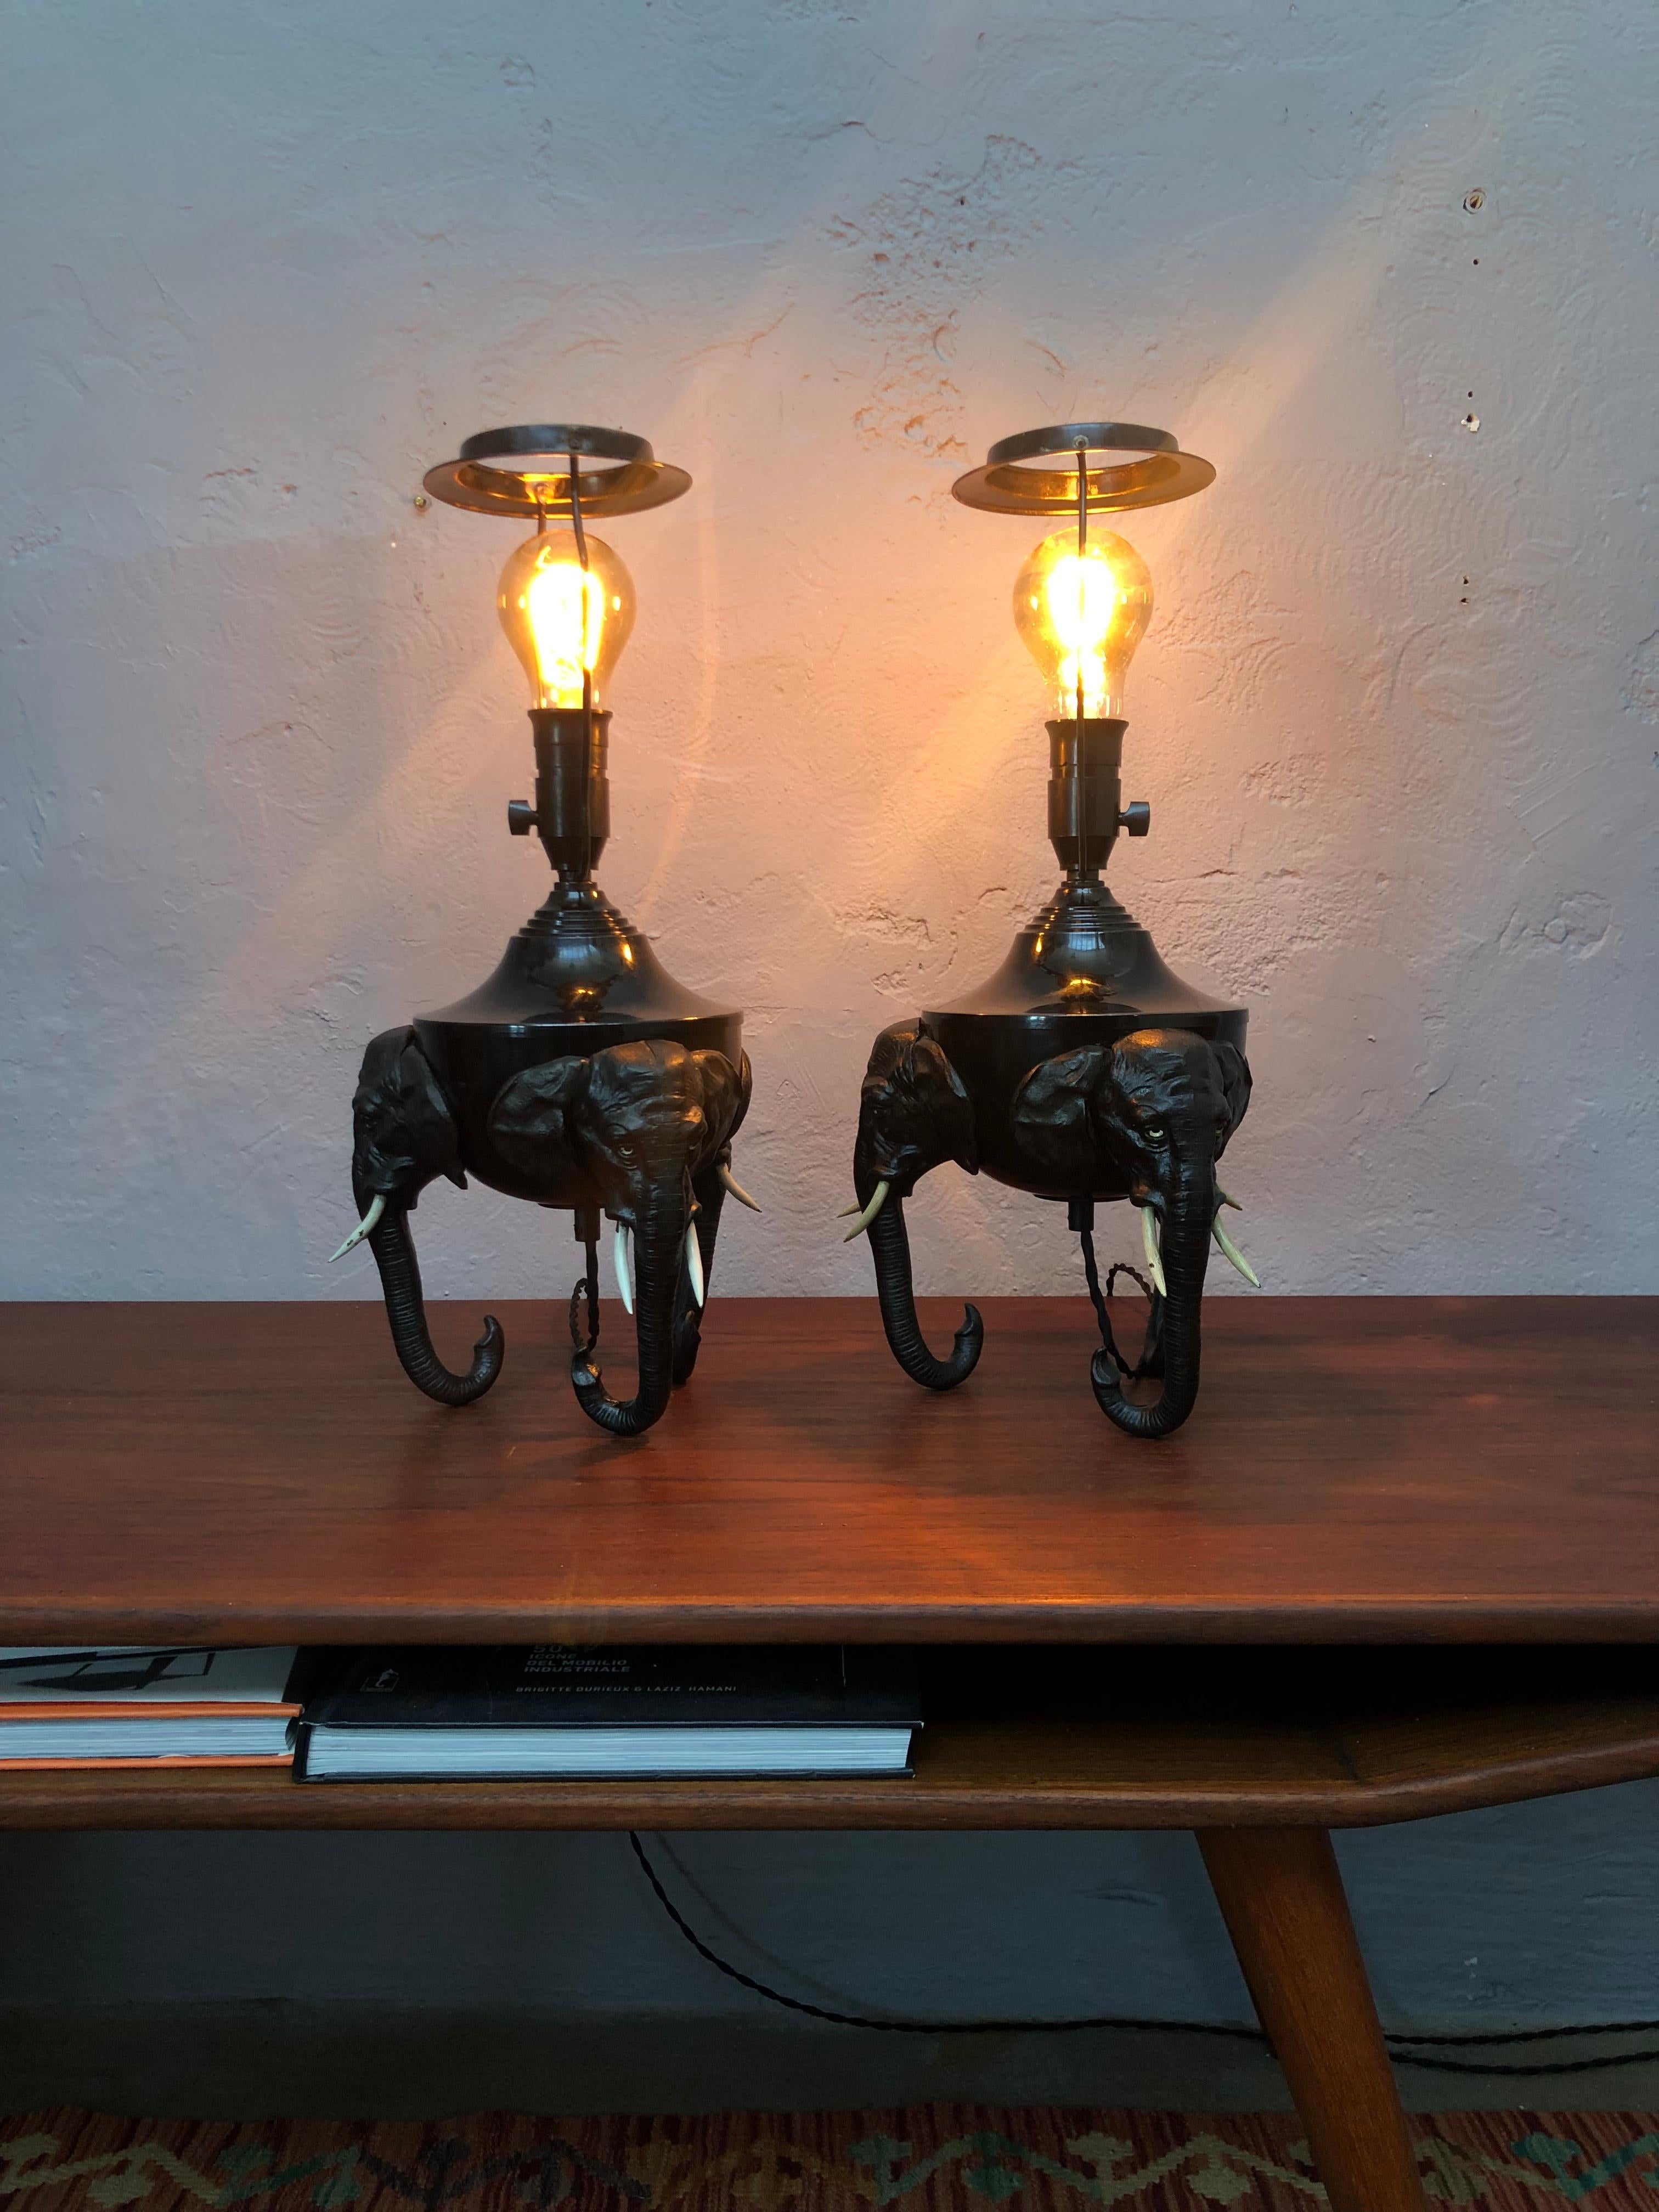 A pair of rare antique Danish elephant lamps from the 1920s.
Raised on 3 elephant heads of cast iron with white painted iron tusks.
The elephant heads are attached with two screws to a black painted brass vessel that originally would have been